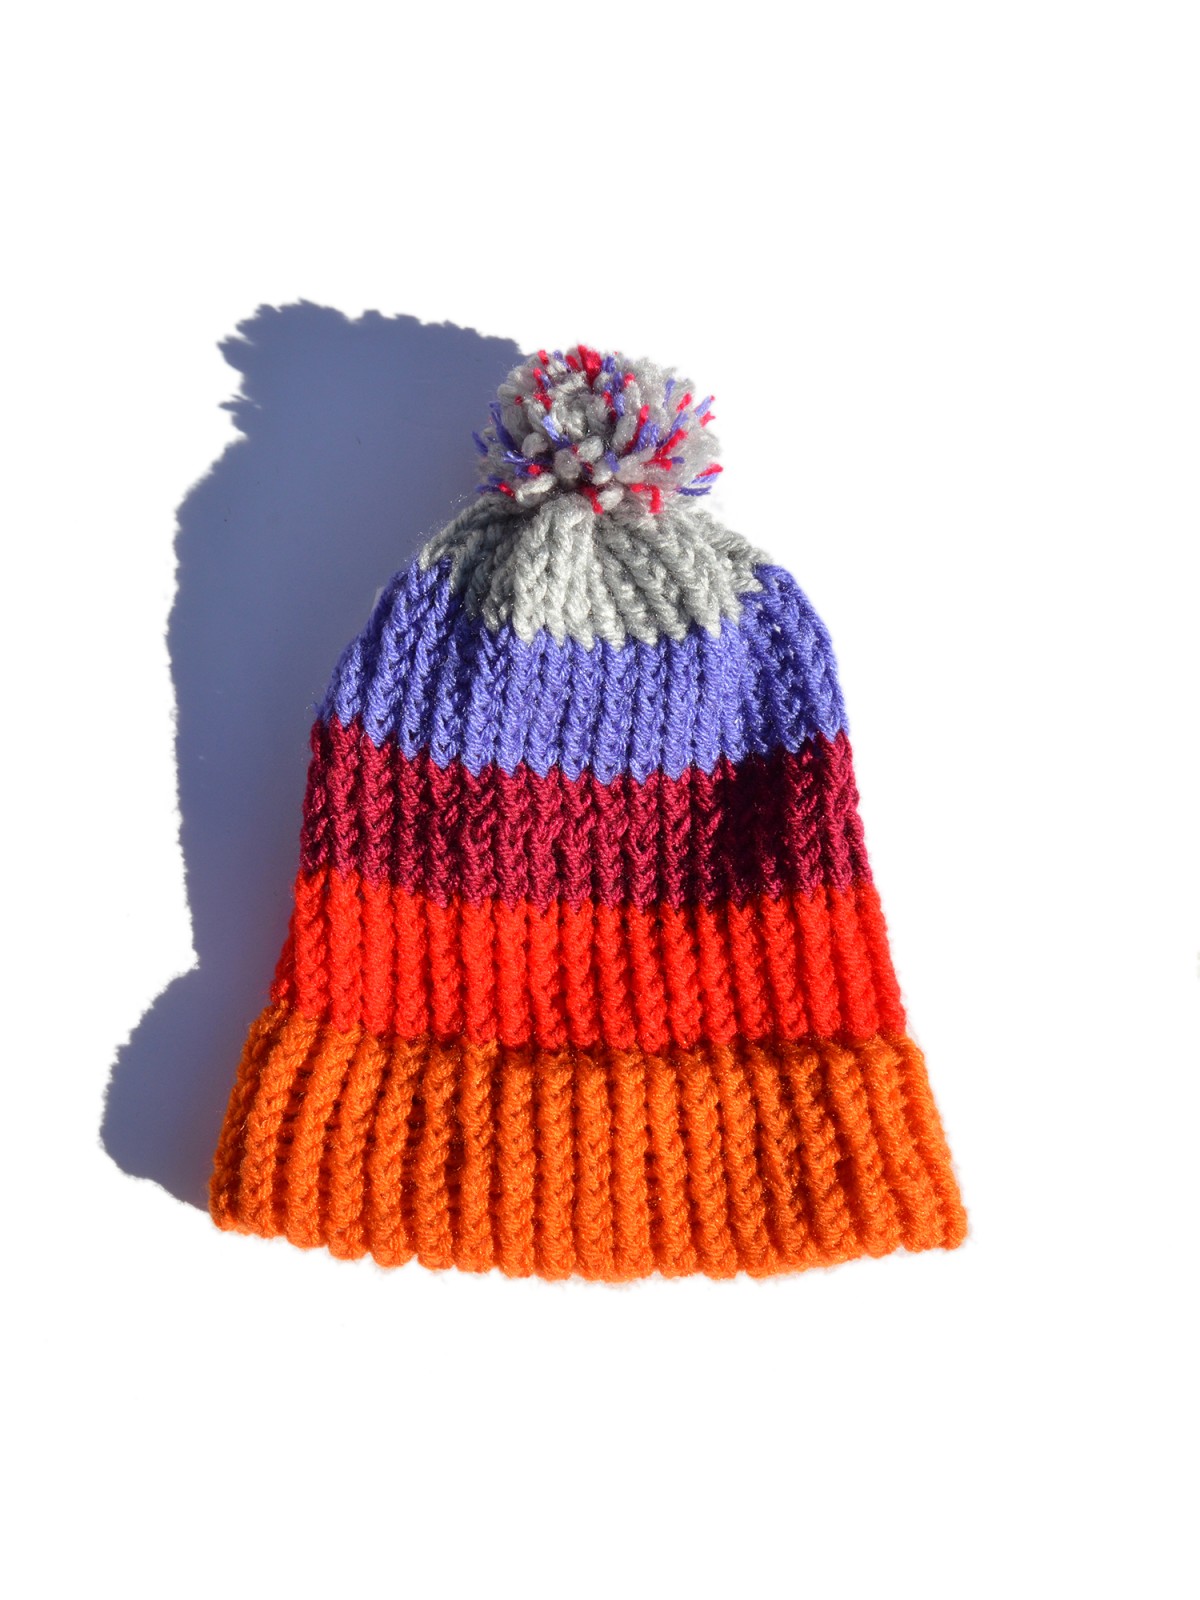 San Fabrizzio Handmade Grey, lilac, and bordeaux, red Hat orange Beanie